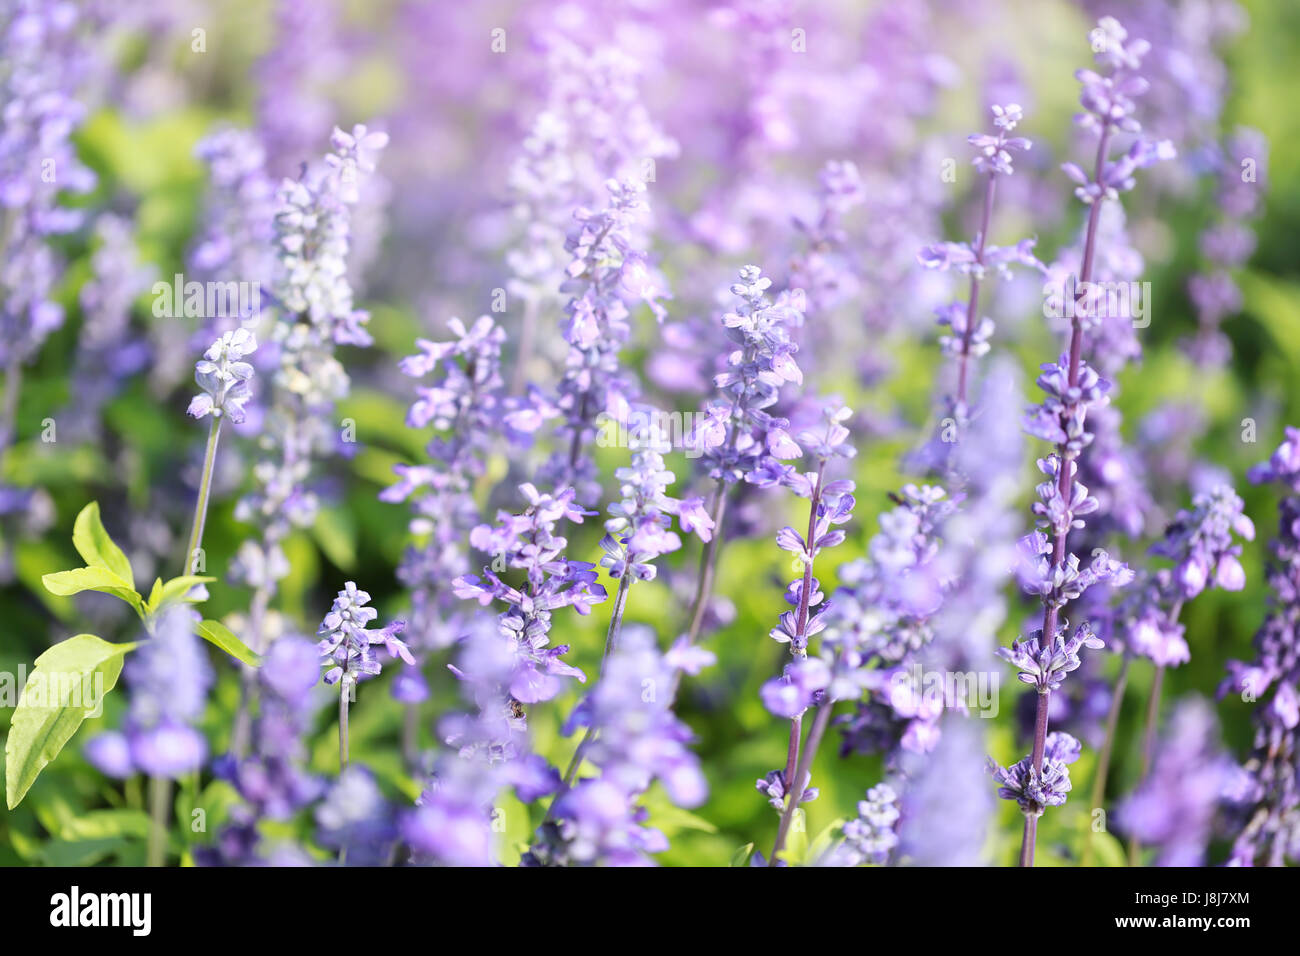 Lavender flowers blooming Vintage color in the garden for design nature background. Stock Photo